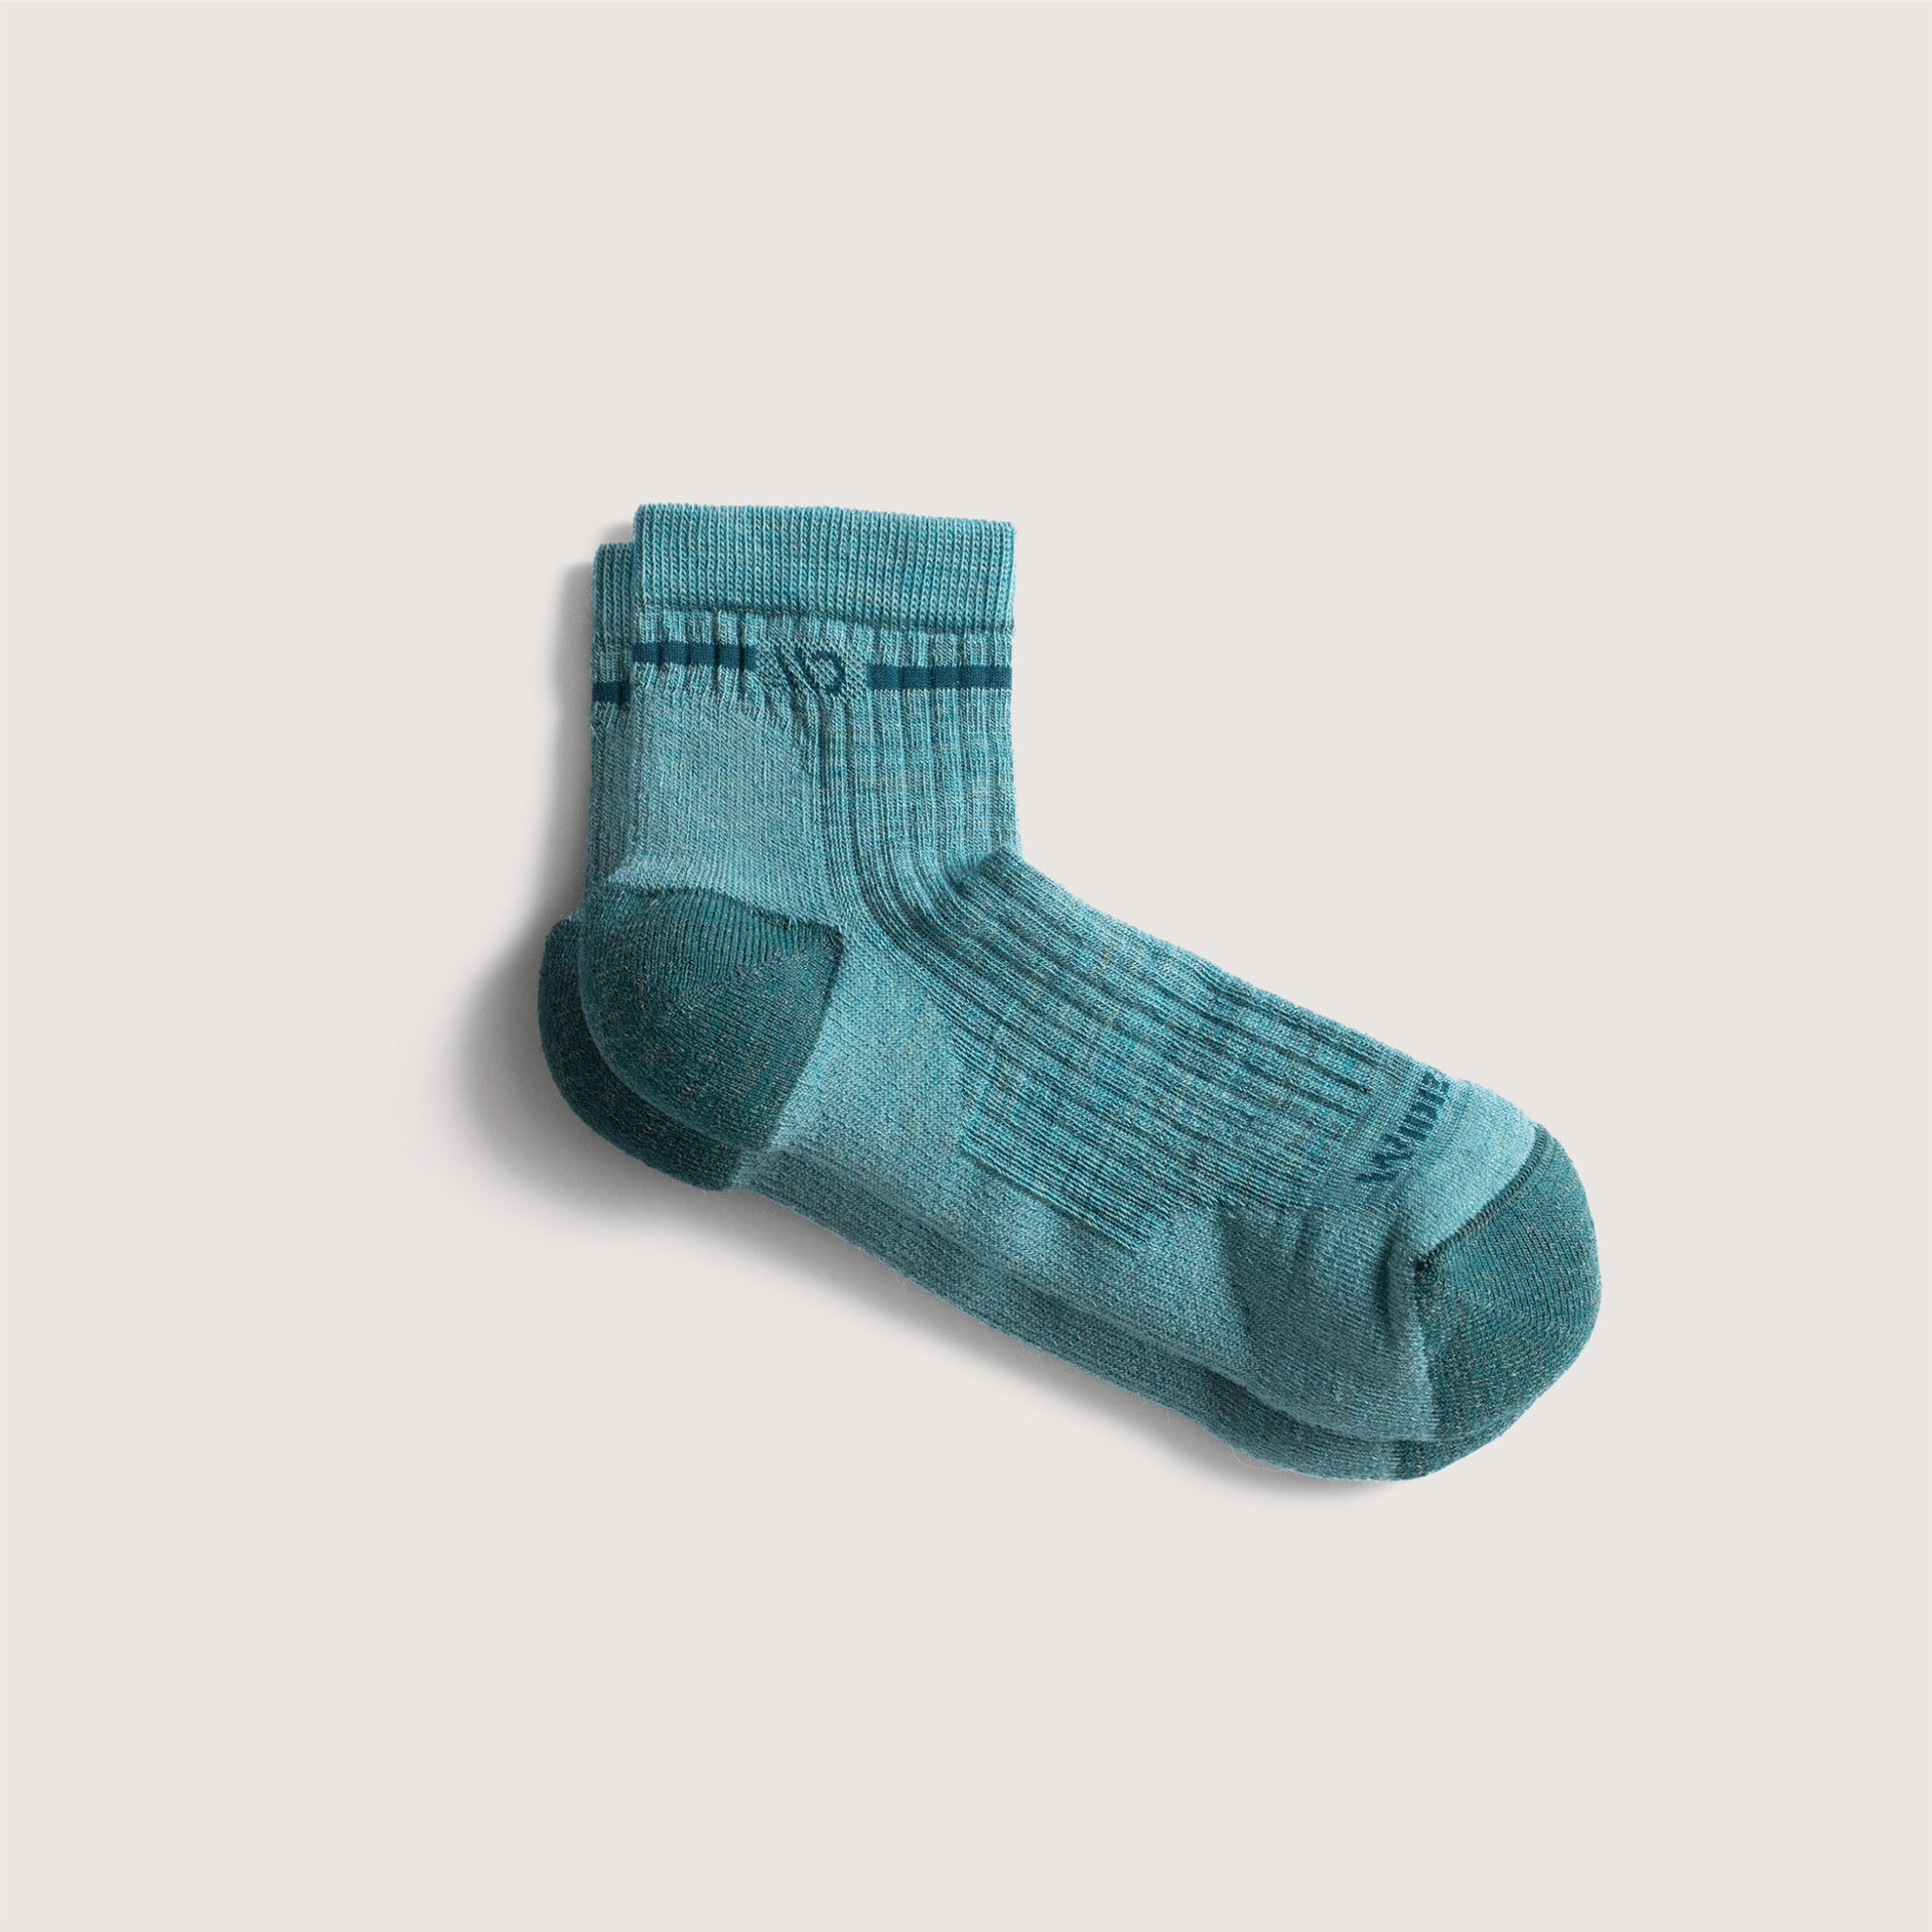 Flat socks featuring teal toe, light teal body, teal logo and stripe under the cuff--Light Teal